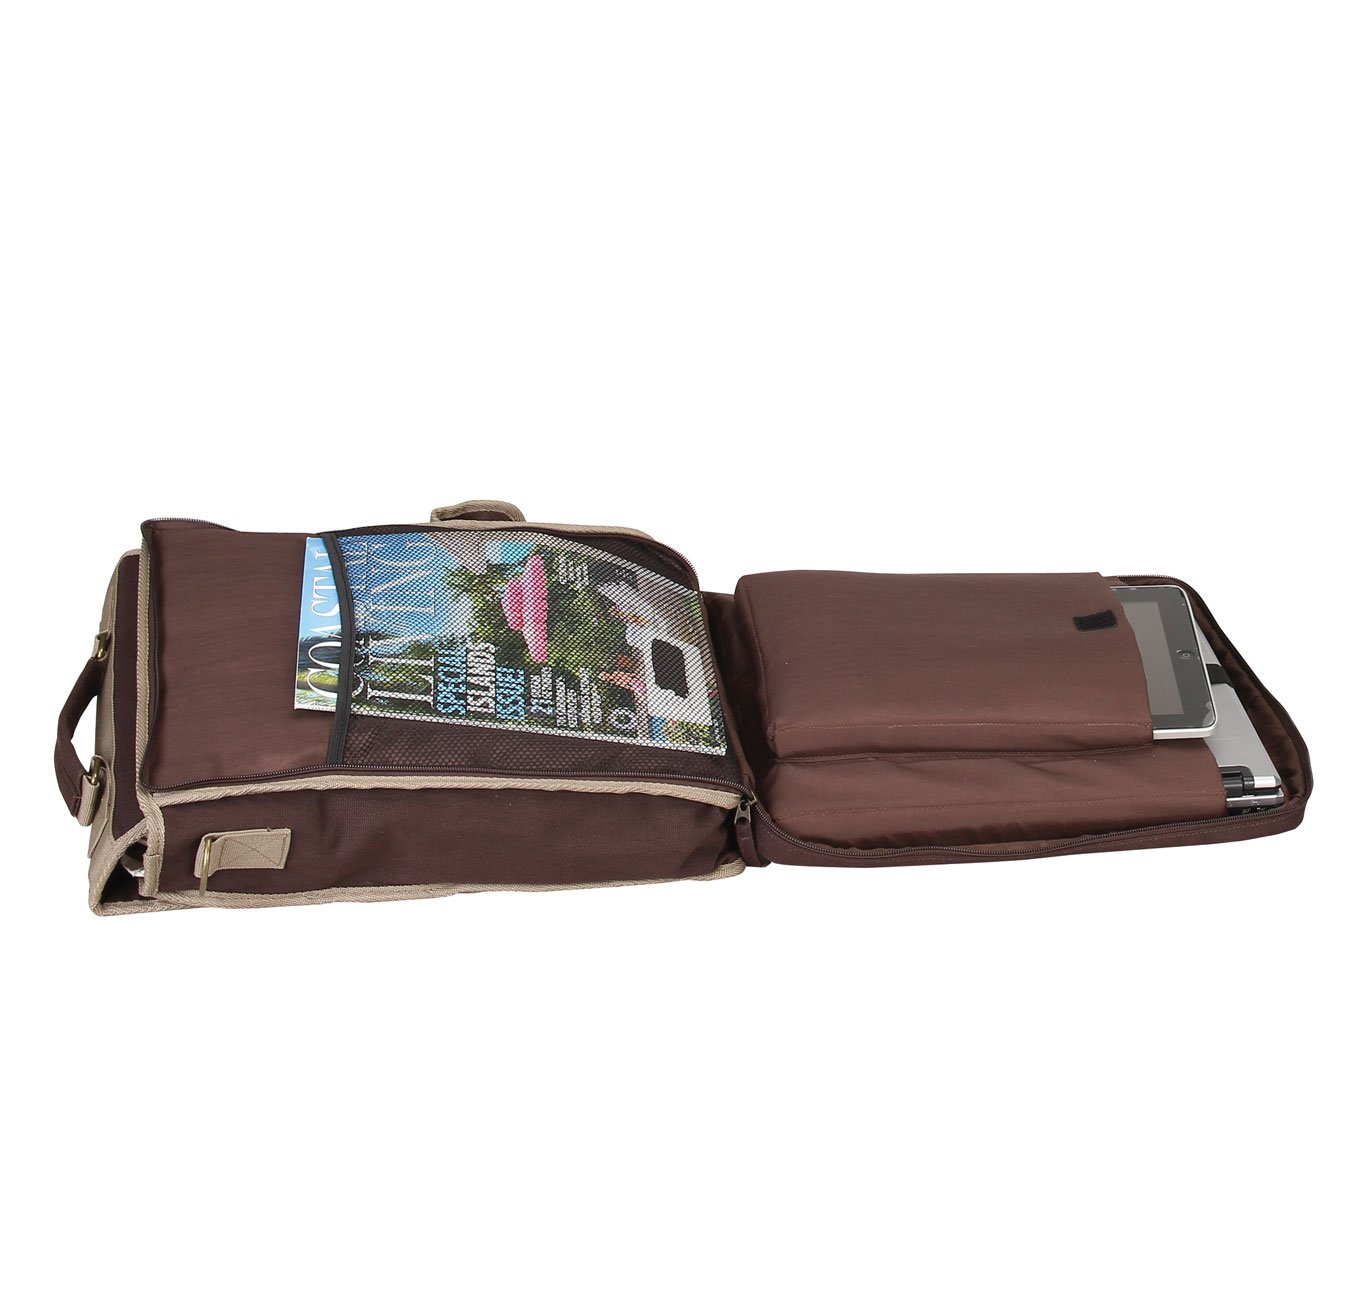 Bellino Expresso Vertical Messenger, Brown, One Size